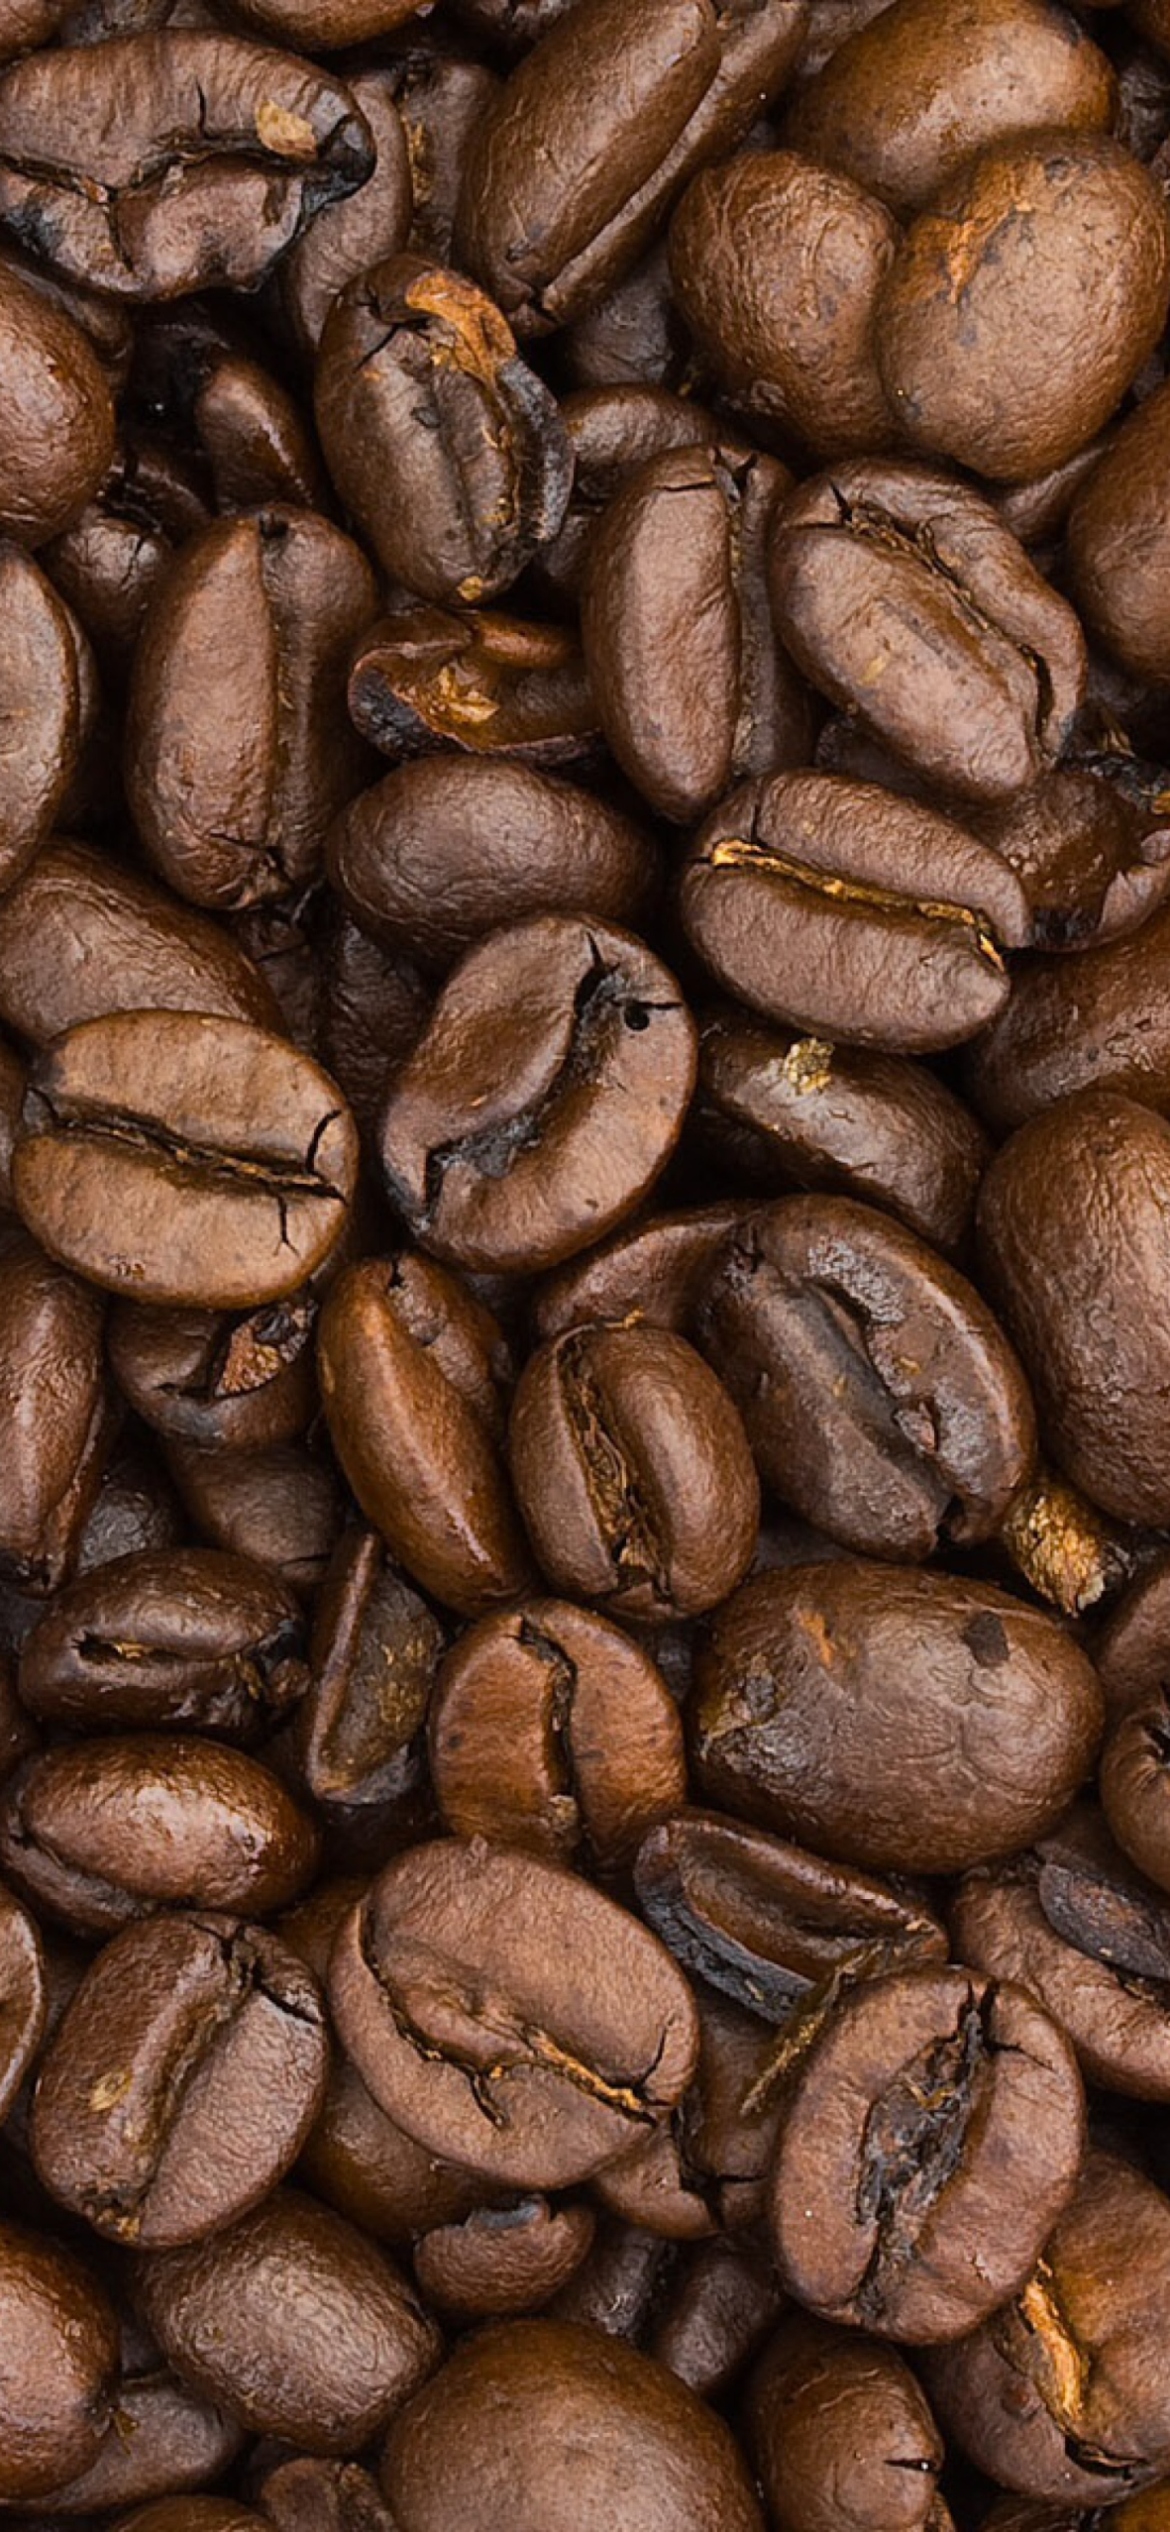 Roasted Coffee Beans wallpaper 1170x2532